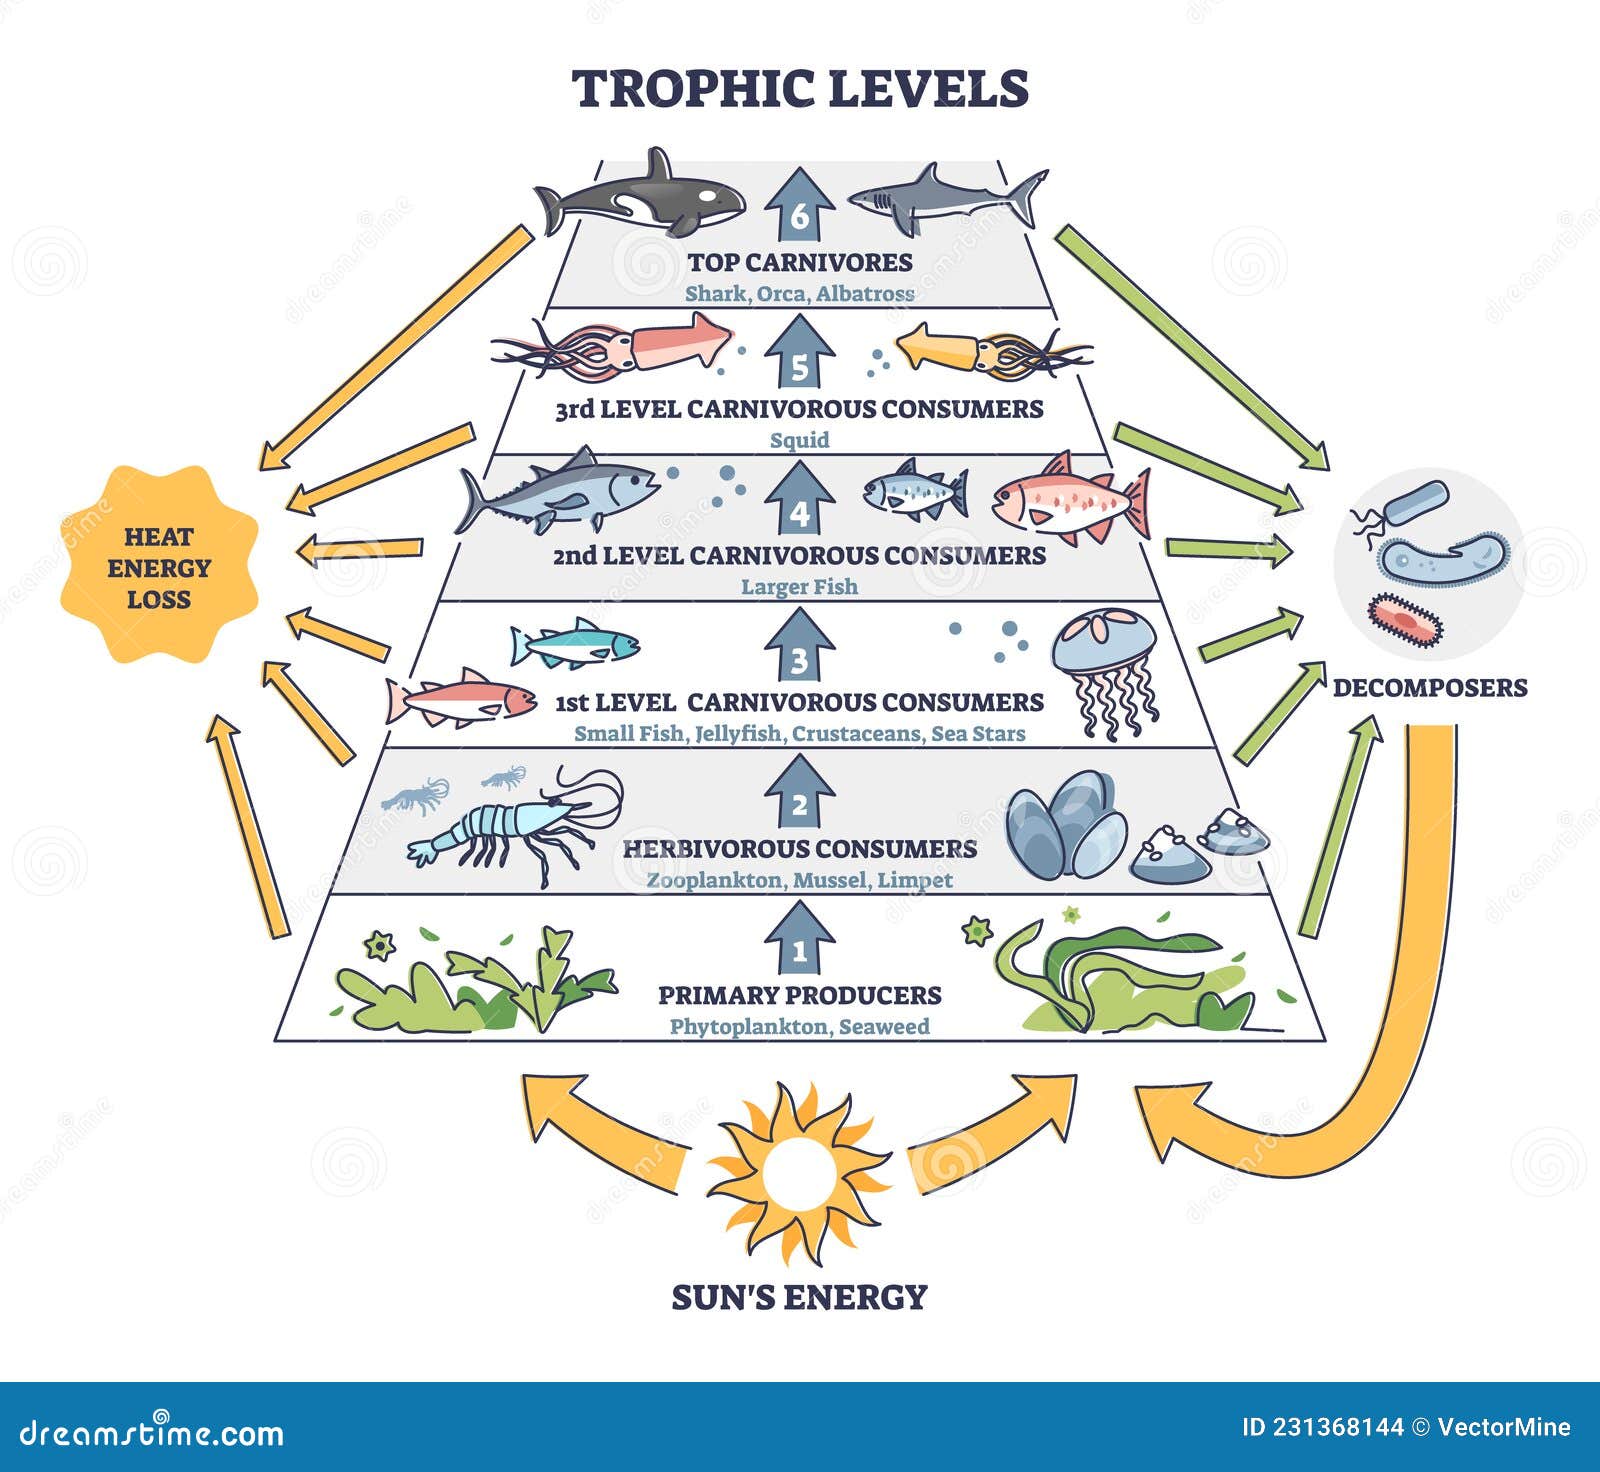 trophic levels in water wildlife as ocean food chain pyramid outline diagram